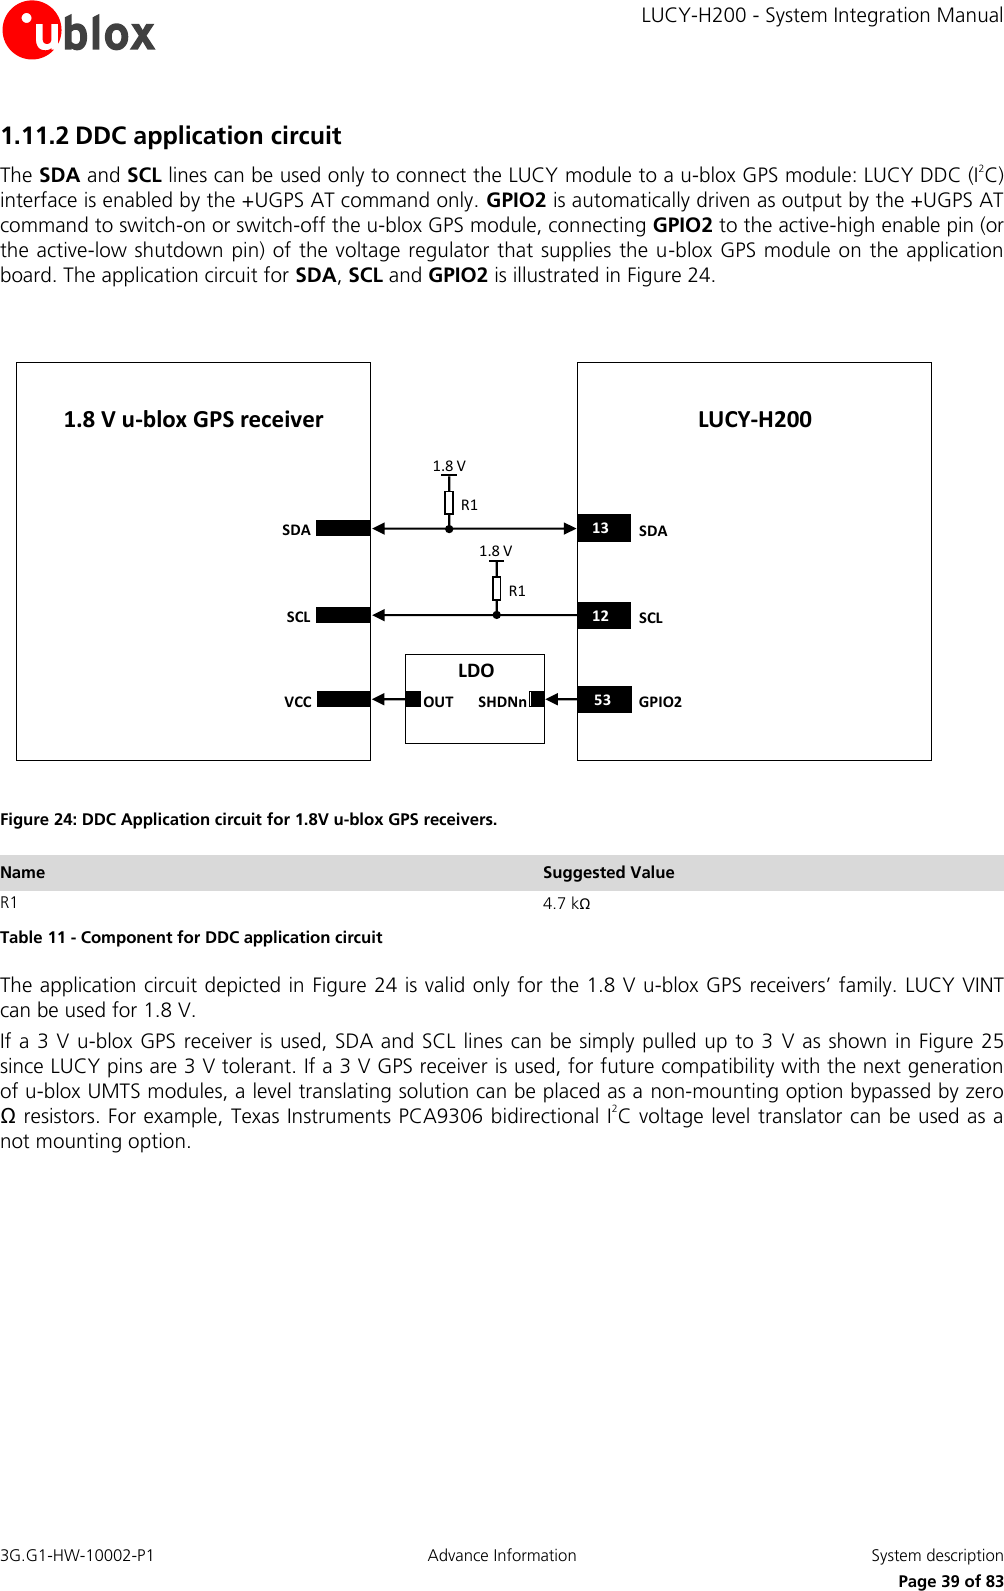     LUCY-H200 - System Integration Manual 3G.G1-HW-10002-P1  Advance Information  System description      Page 39 of 83 1.11.2 DDC application circuit The SDA and SCL lines can be used only to connect the LUCY module to a u-blox GPS module: LUCY DDC (I2C) interface is enabled by the +UGPS AT command only. GPIO2 is automatically driven as output by the +UGPS AT command to switch-on or switch-off the u-blox GPS module, connecting GPIO2 to the active-high enable pin (or the active-low shutdown pin) of the voltage regulator that supplies the u-blox GPS module on the application board. The application circuit for SDA, SCL and GPIO2 is illustrated in Figure 24.   LUCY-H2001.8 V u-blox GPS receiverSDASCL1312SDASCLR1R11.8 VVCC 53 GPIO2OUT SHDNnLDO1.8 V1253 Figure 24: DDC Application circuit for 1.8V u-blox GPS receivers. Name Suggested Value R1 4.7 kΩ Table 11 - Component for DDC application circuit The application circuit depicted in Figure 24 is valid only for the 1.8 V u-blox GPS receivers’ family. LUCY VINT can be used for 1.8 V. If a 3 V u-blox GPS receiver is used, SDA and SCL lines can be simply pulled up to 3 V as shown in Figure 25 since LUCY pins are 3 V tolerant. If a 3 V GPS receiver is used, for future compatibility with the next generation of u-blox UMTS modules, a level translating solution can be placed as a non-mounting option bypassed by zero Ω resistors. For example, Texas Instruments PCA9306 bidirectional I2C voltage level translator can be used as a not mounting option.   